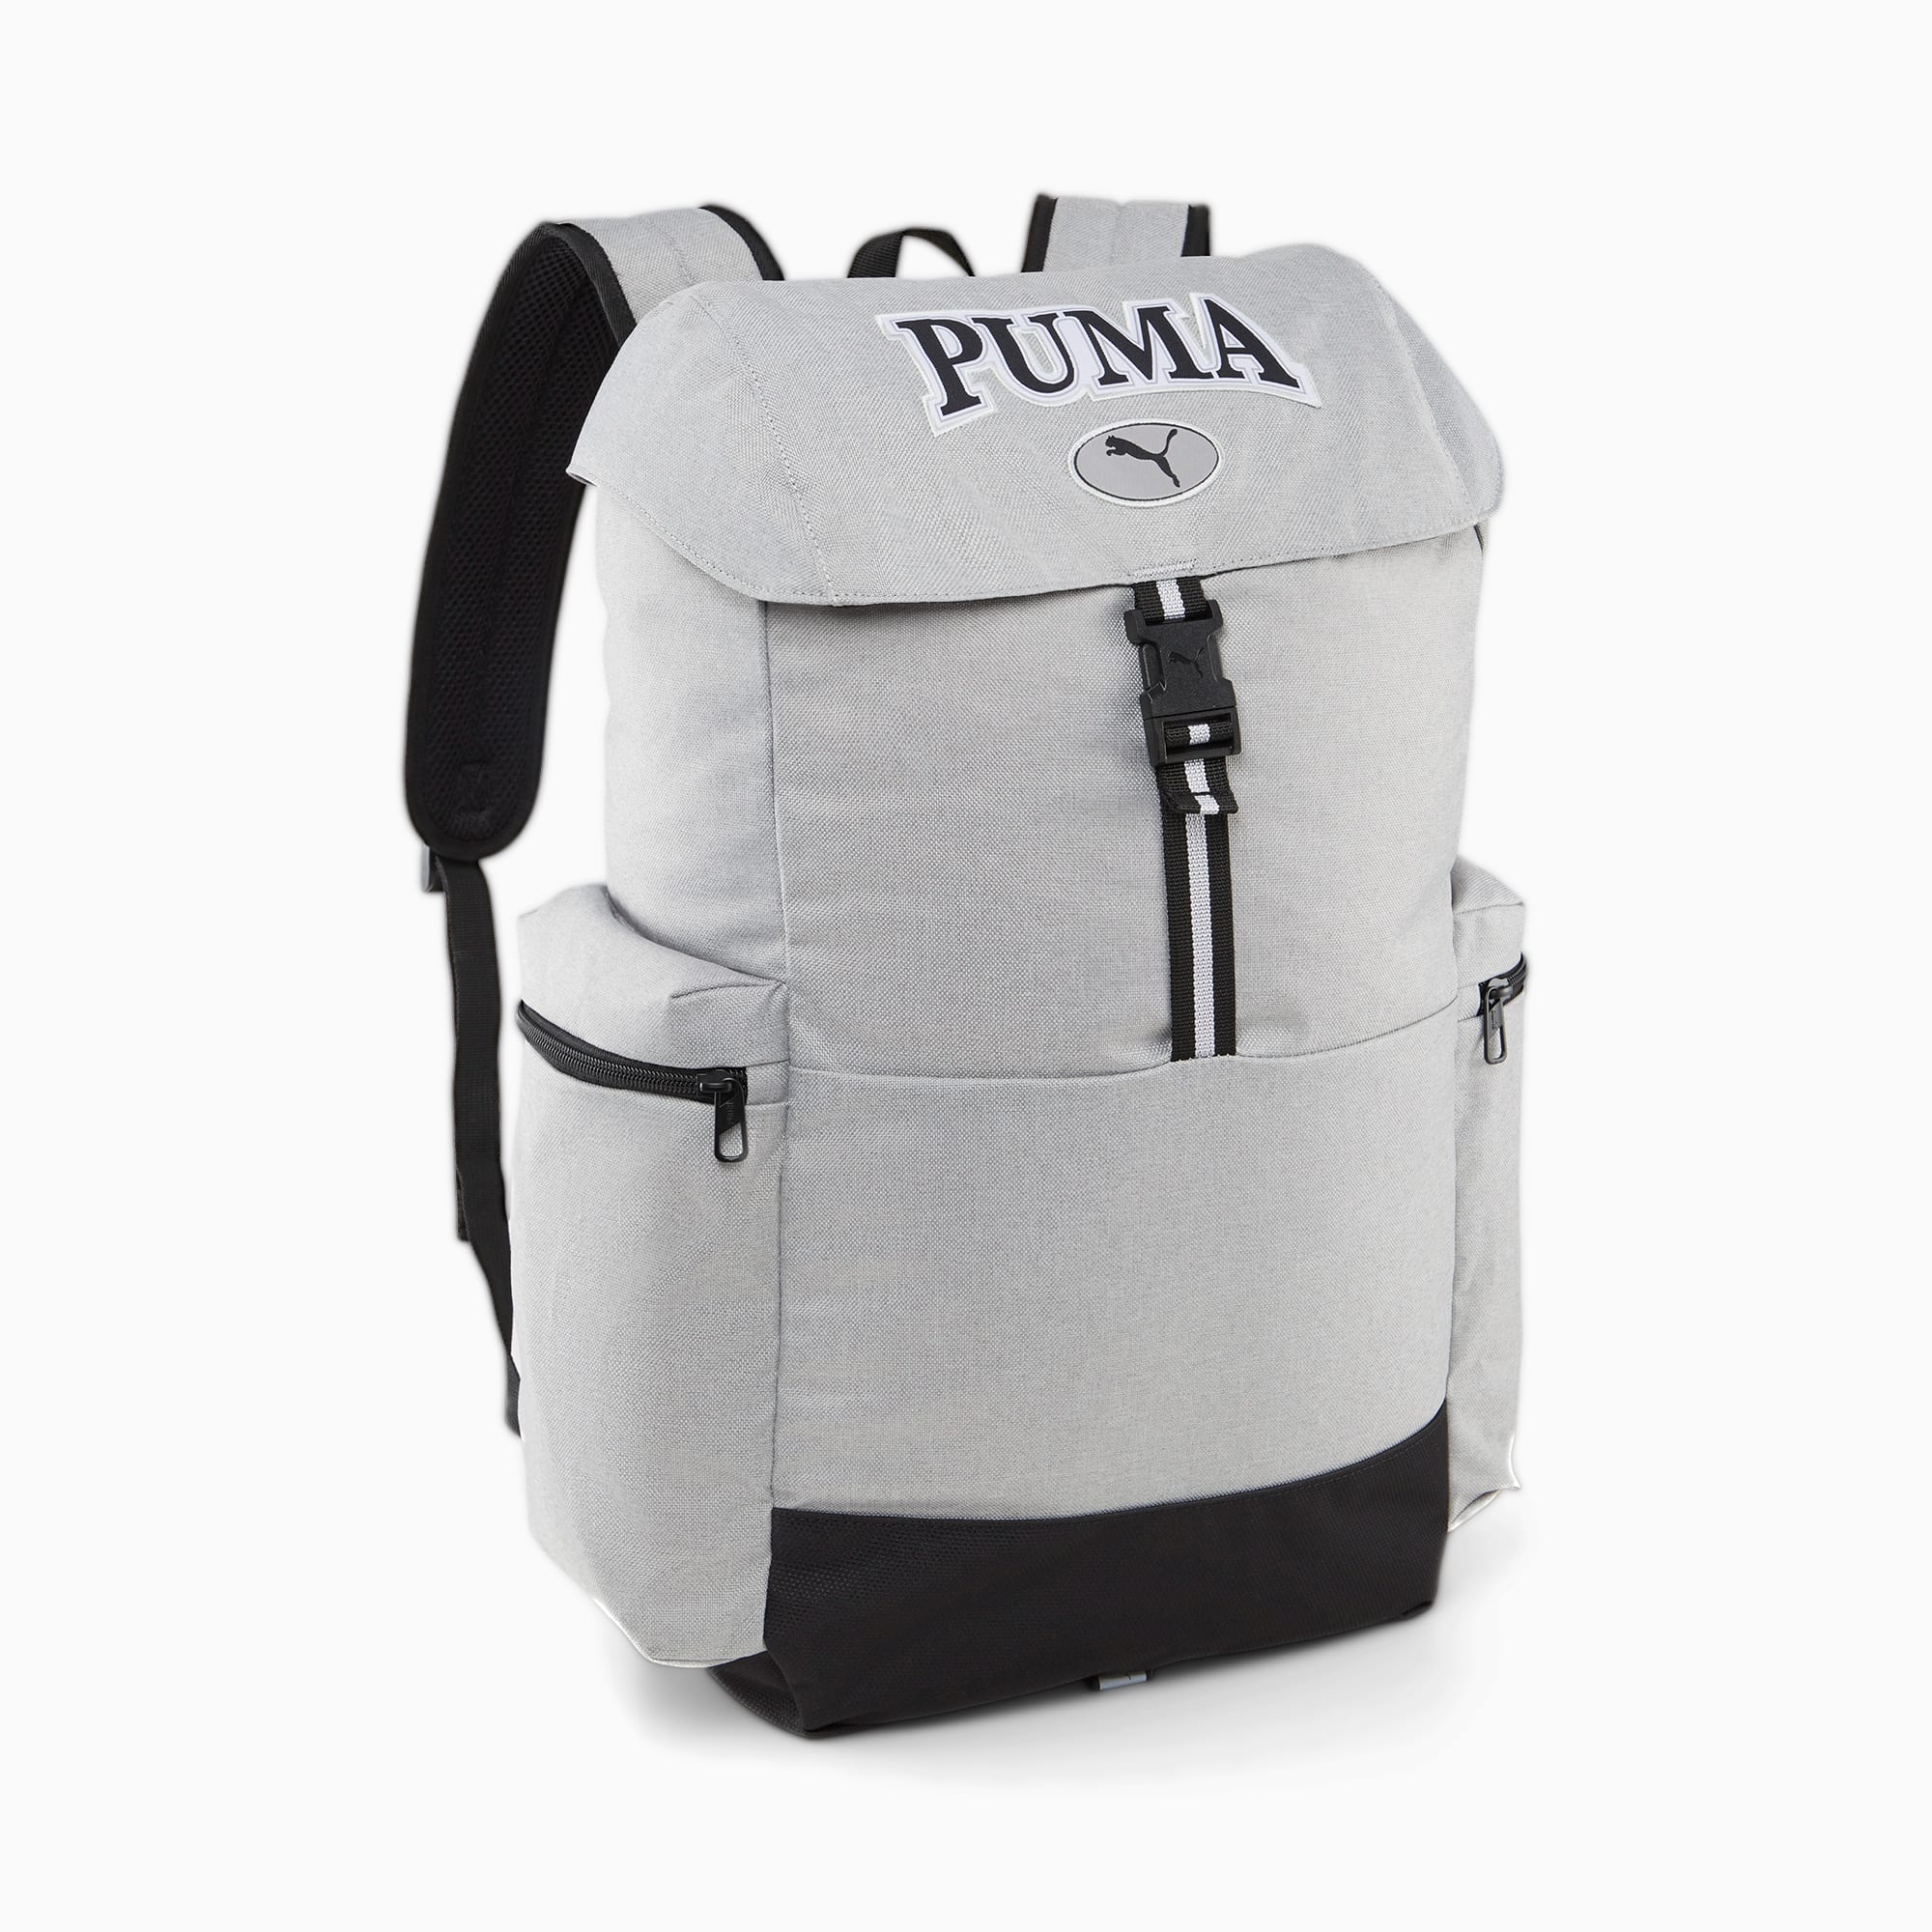 Women's PUMA Squad Backpack, Light Grey Heather, Accessories